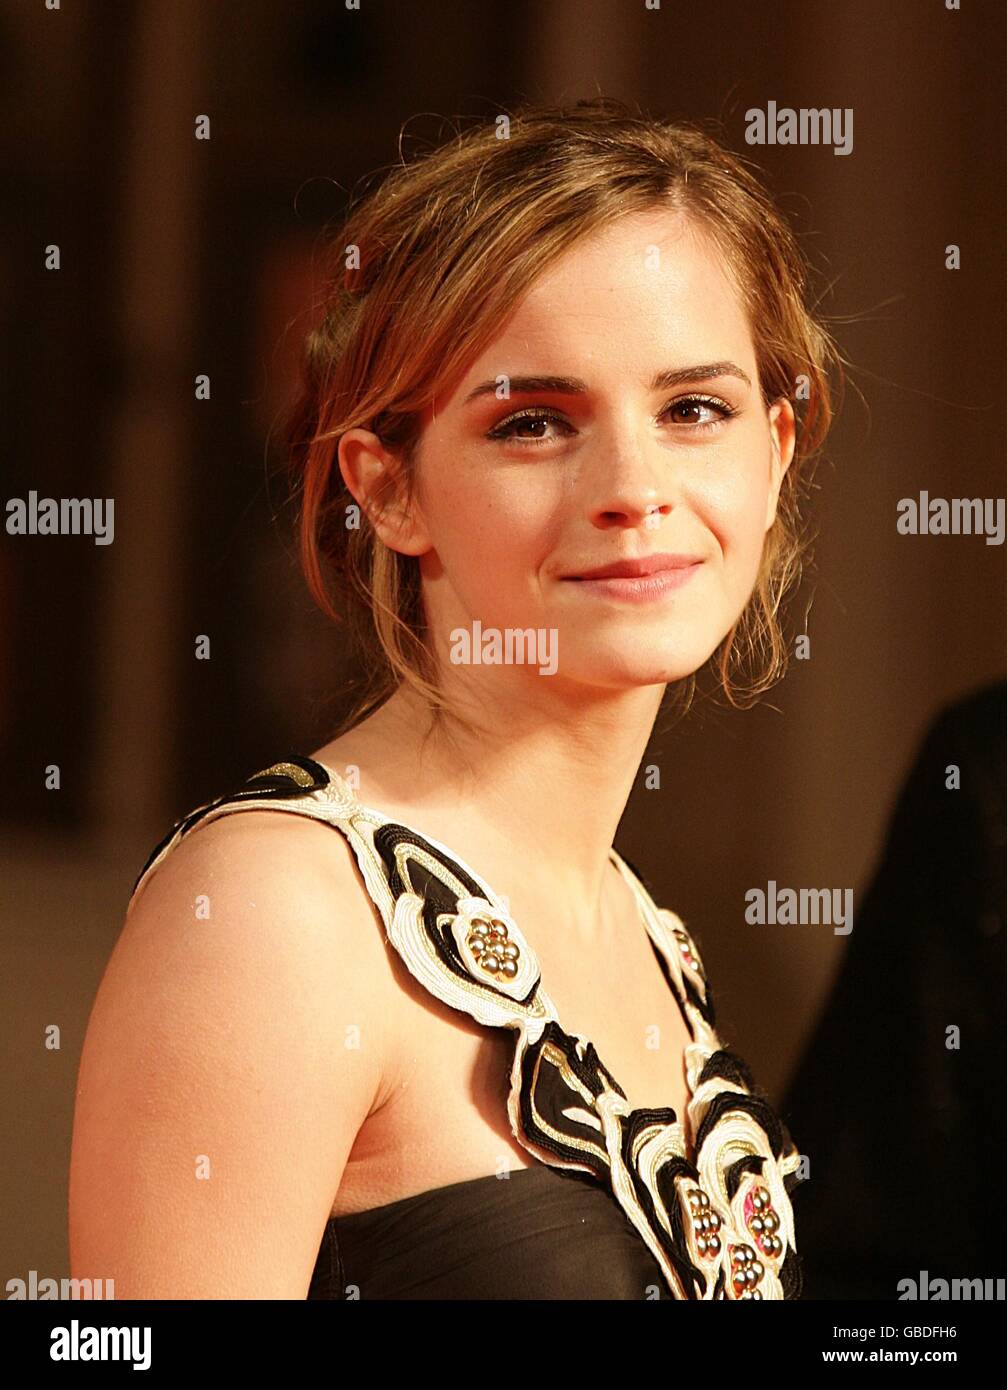 Emma charlotte duerre watson hi-res stock photography and images - Alamy